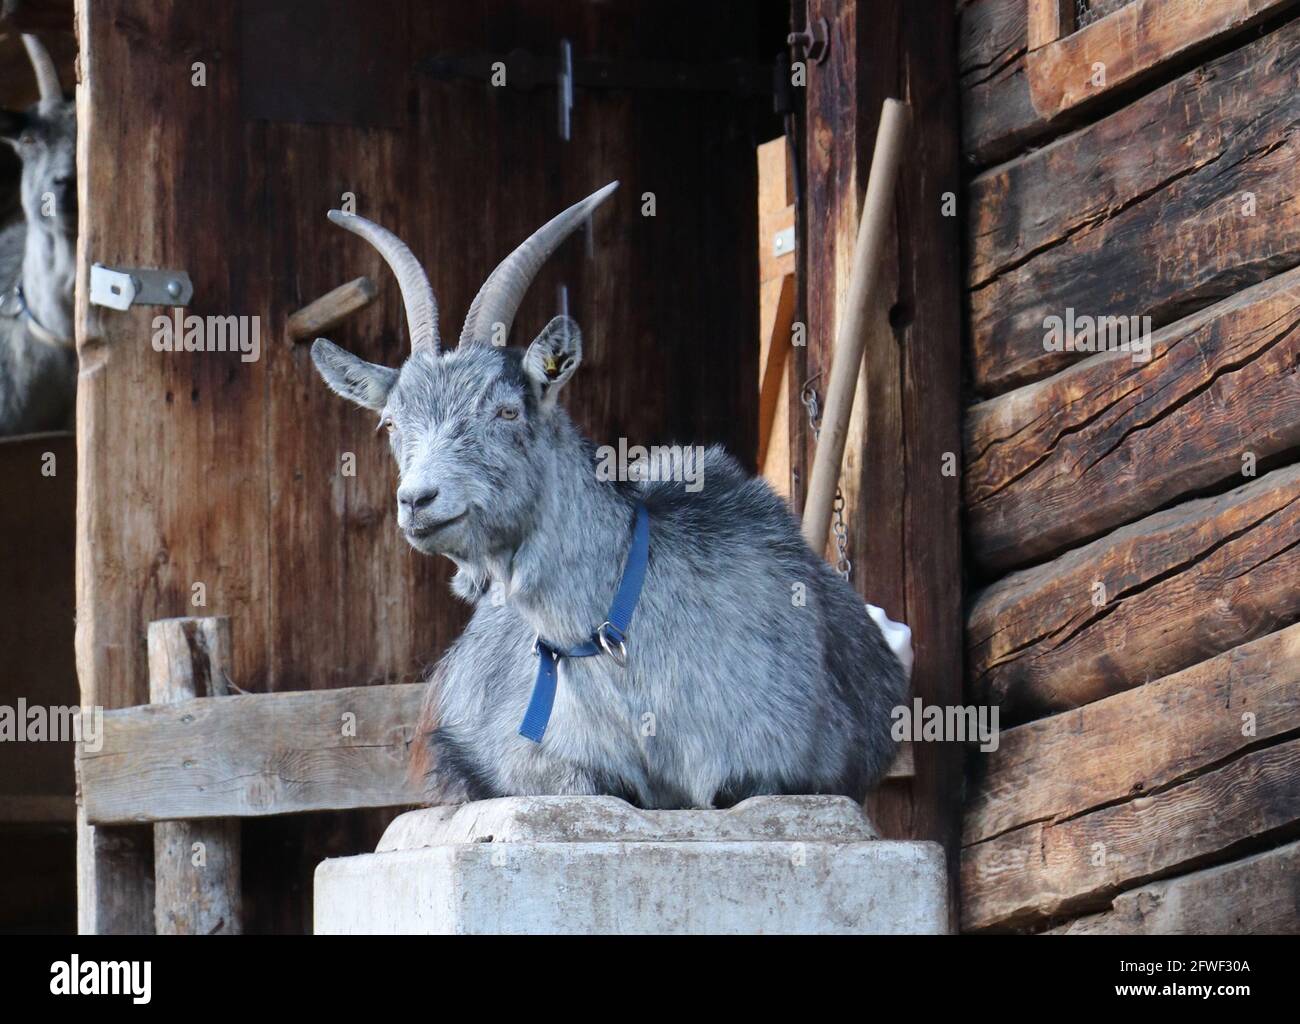 gray goat sitting on a stone next to the wooden stable Stock Photo